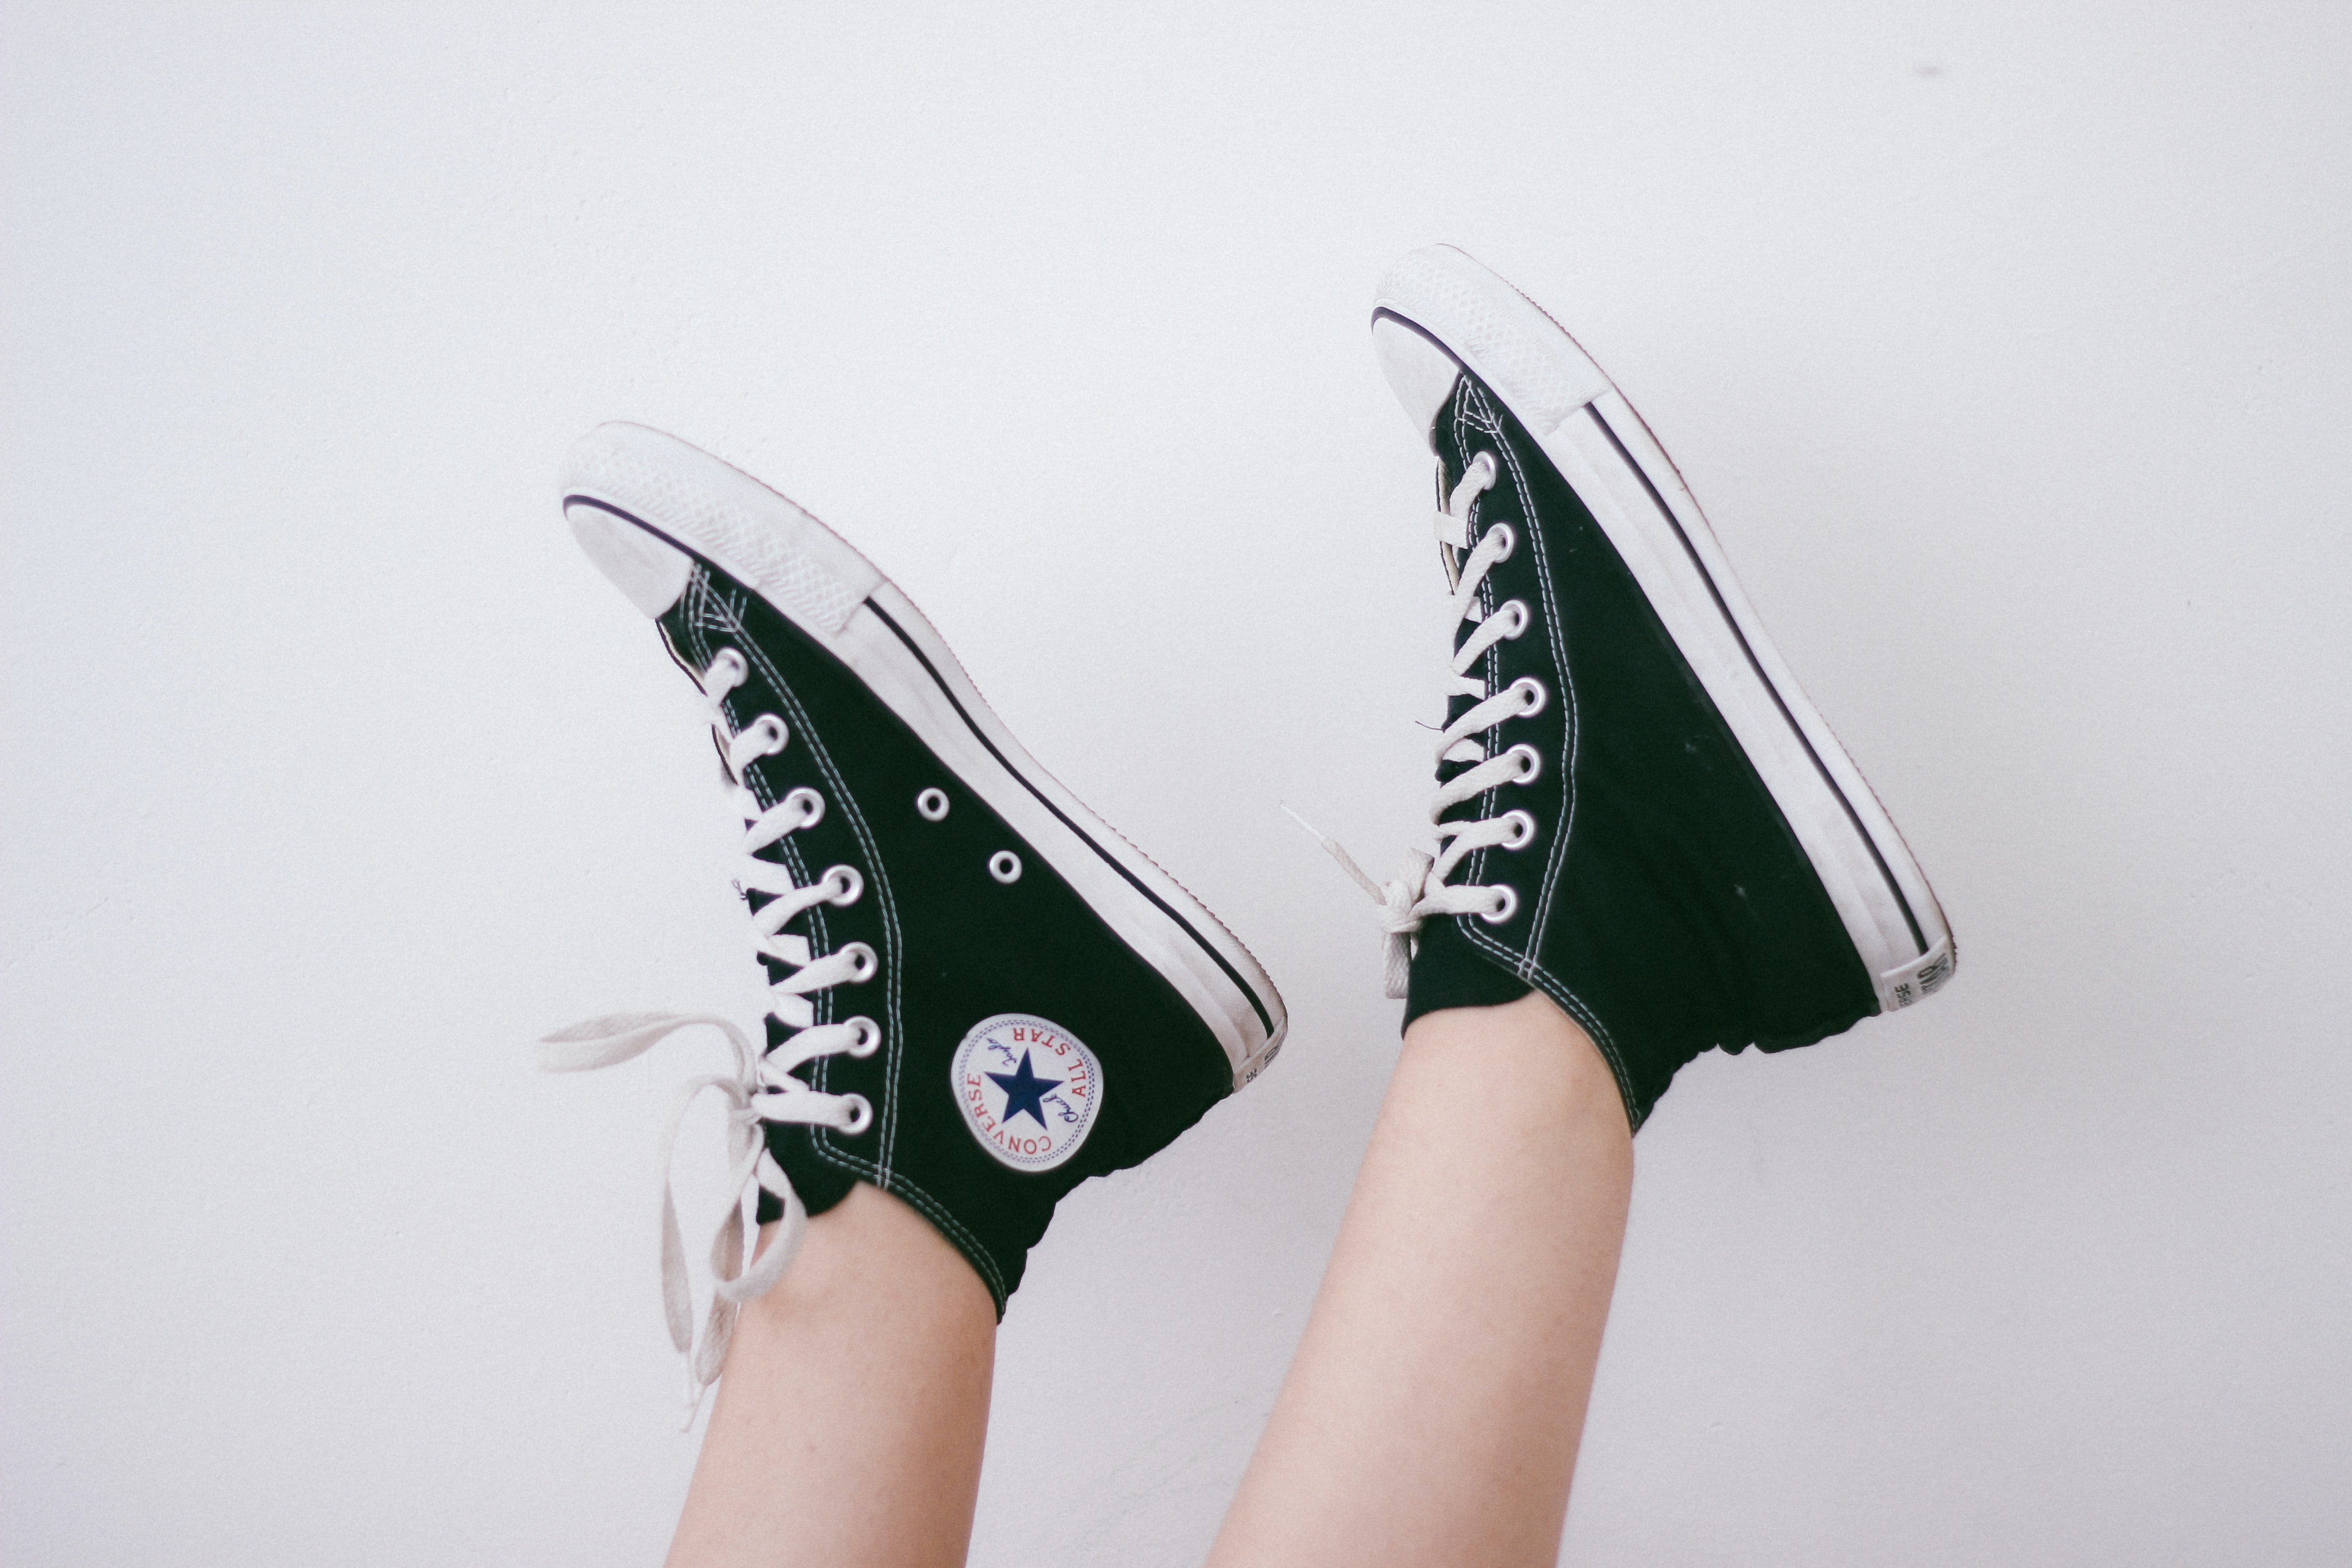 When Does Converse Restock - How to Get Notified When Converse Restocks